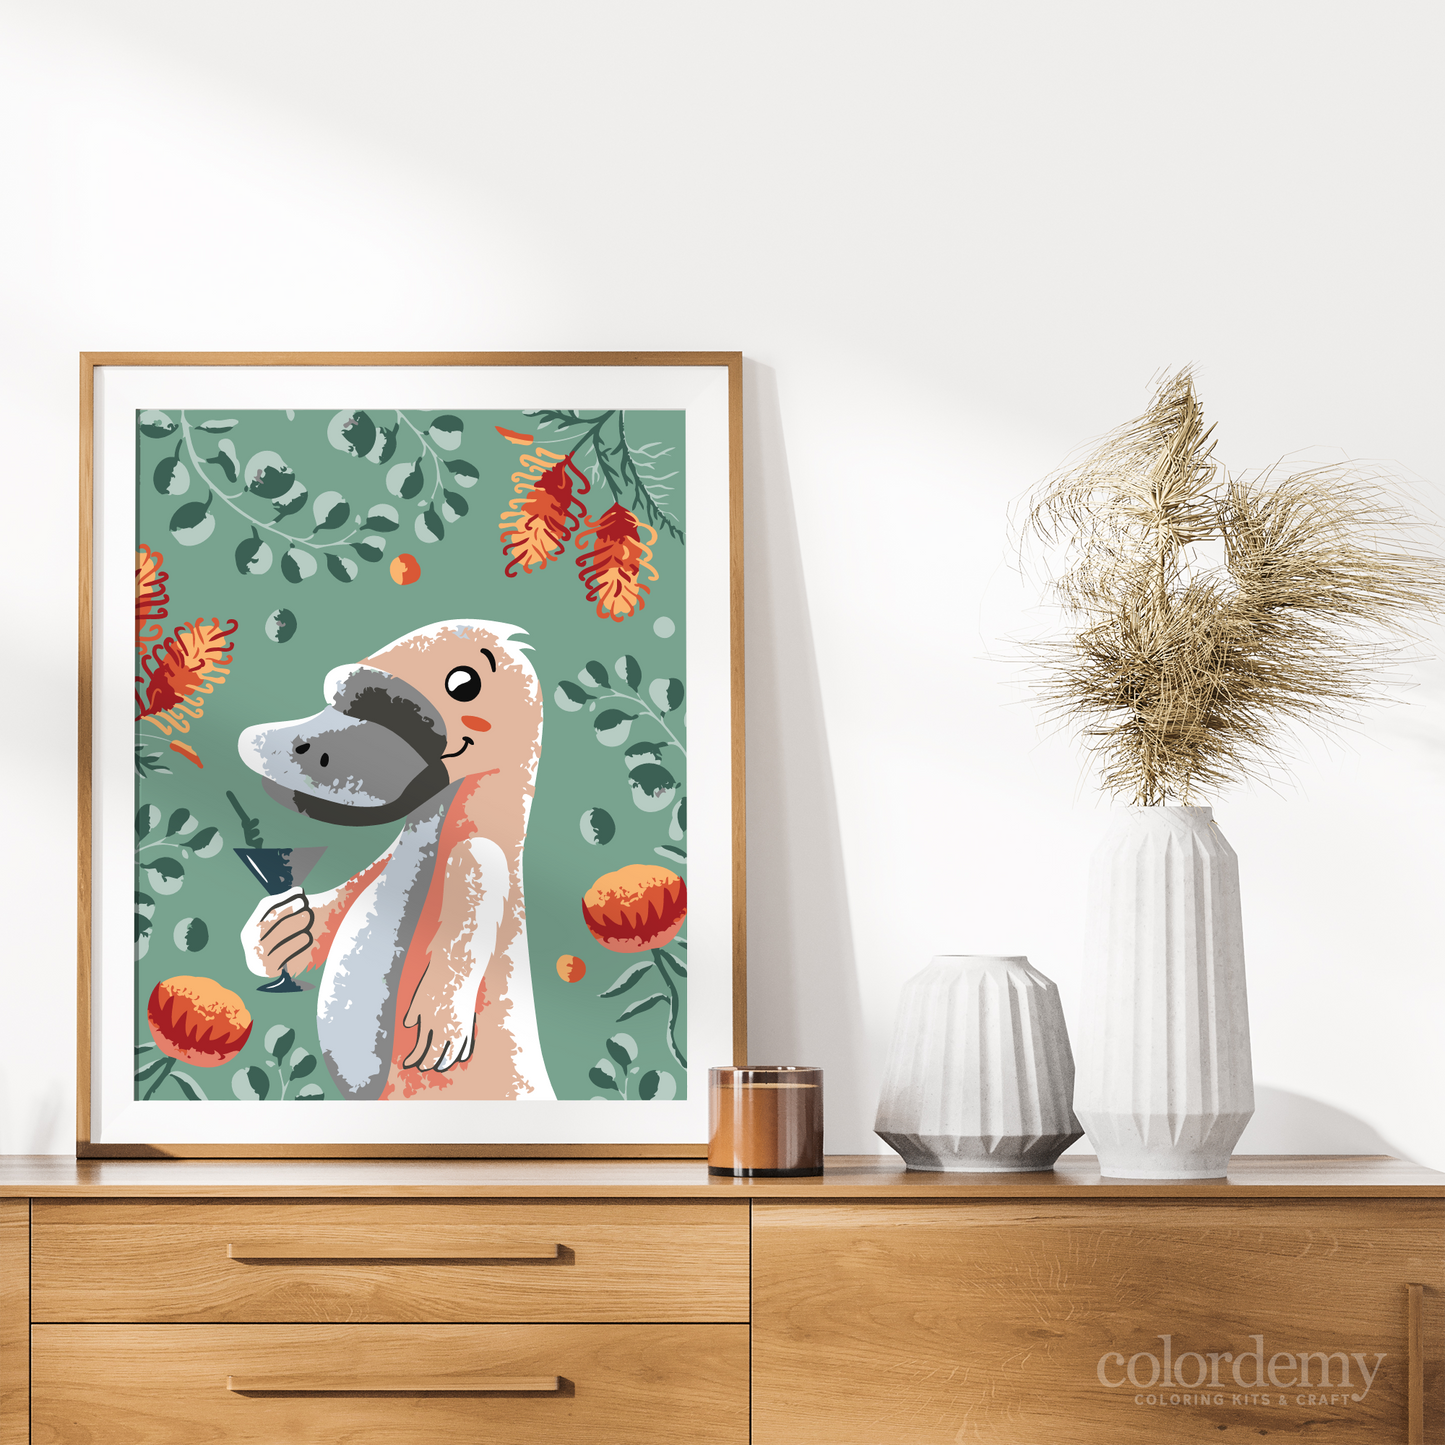 40x50cm Paint by Numbers Kit: Cool Platypus: Minimalist with Leafy Background